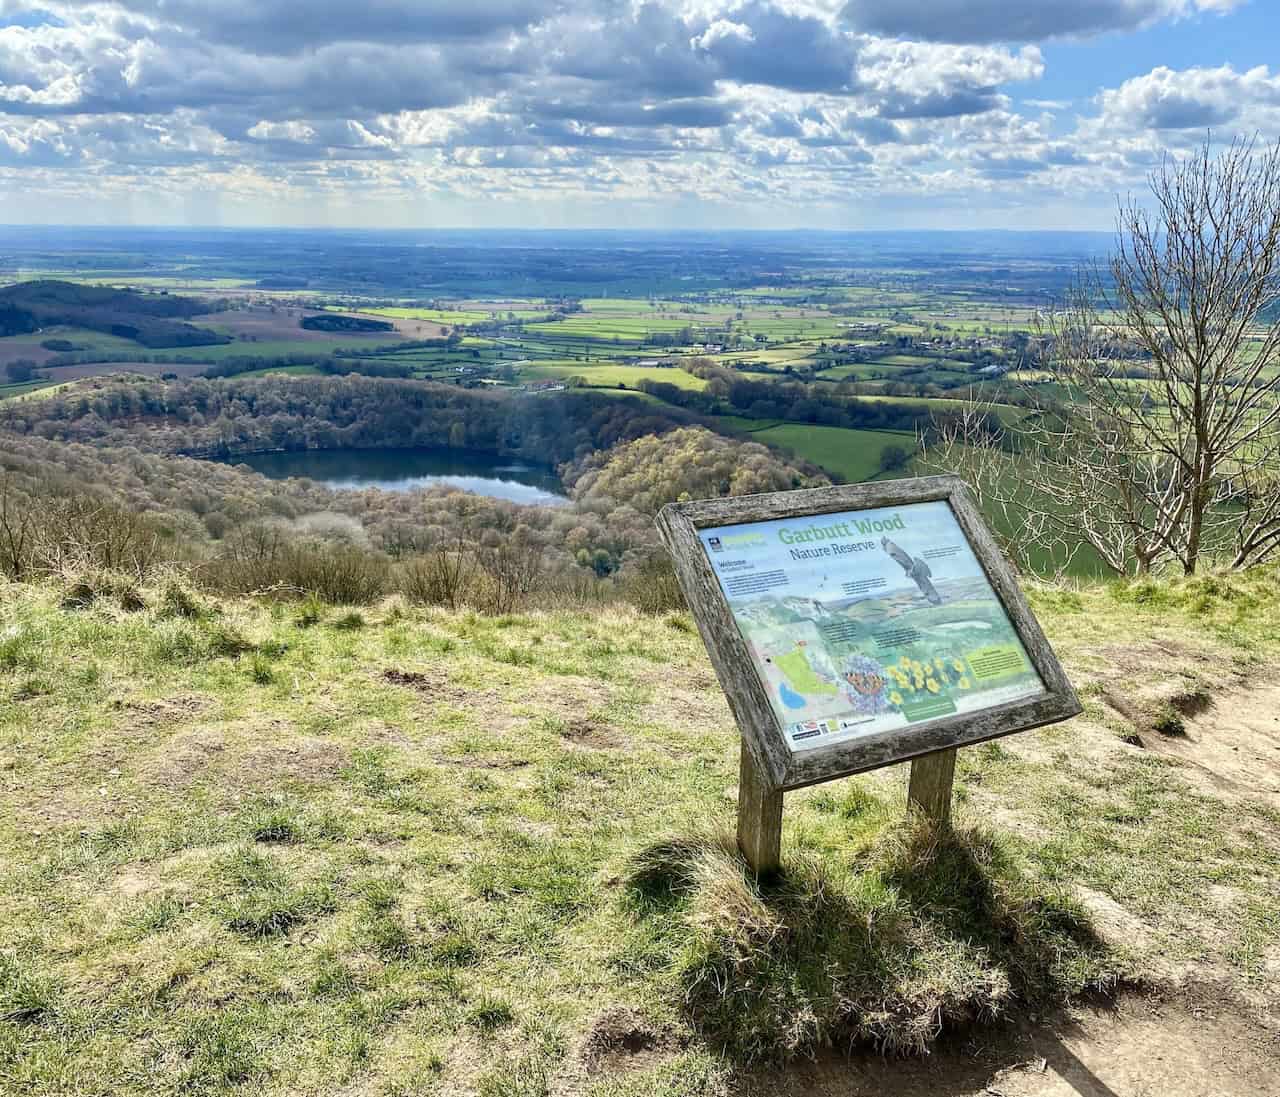 Amazing views of Gormire Lake and the sprawling flatland of the Vale of Mowbray, as seen from the Cleveland Way above Whitestone Cliff on the Gormire Lake walk.